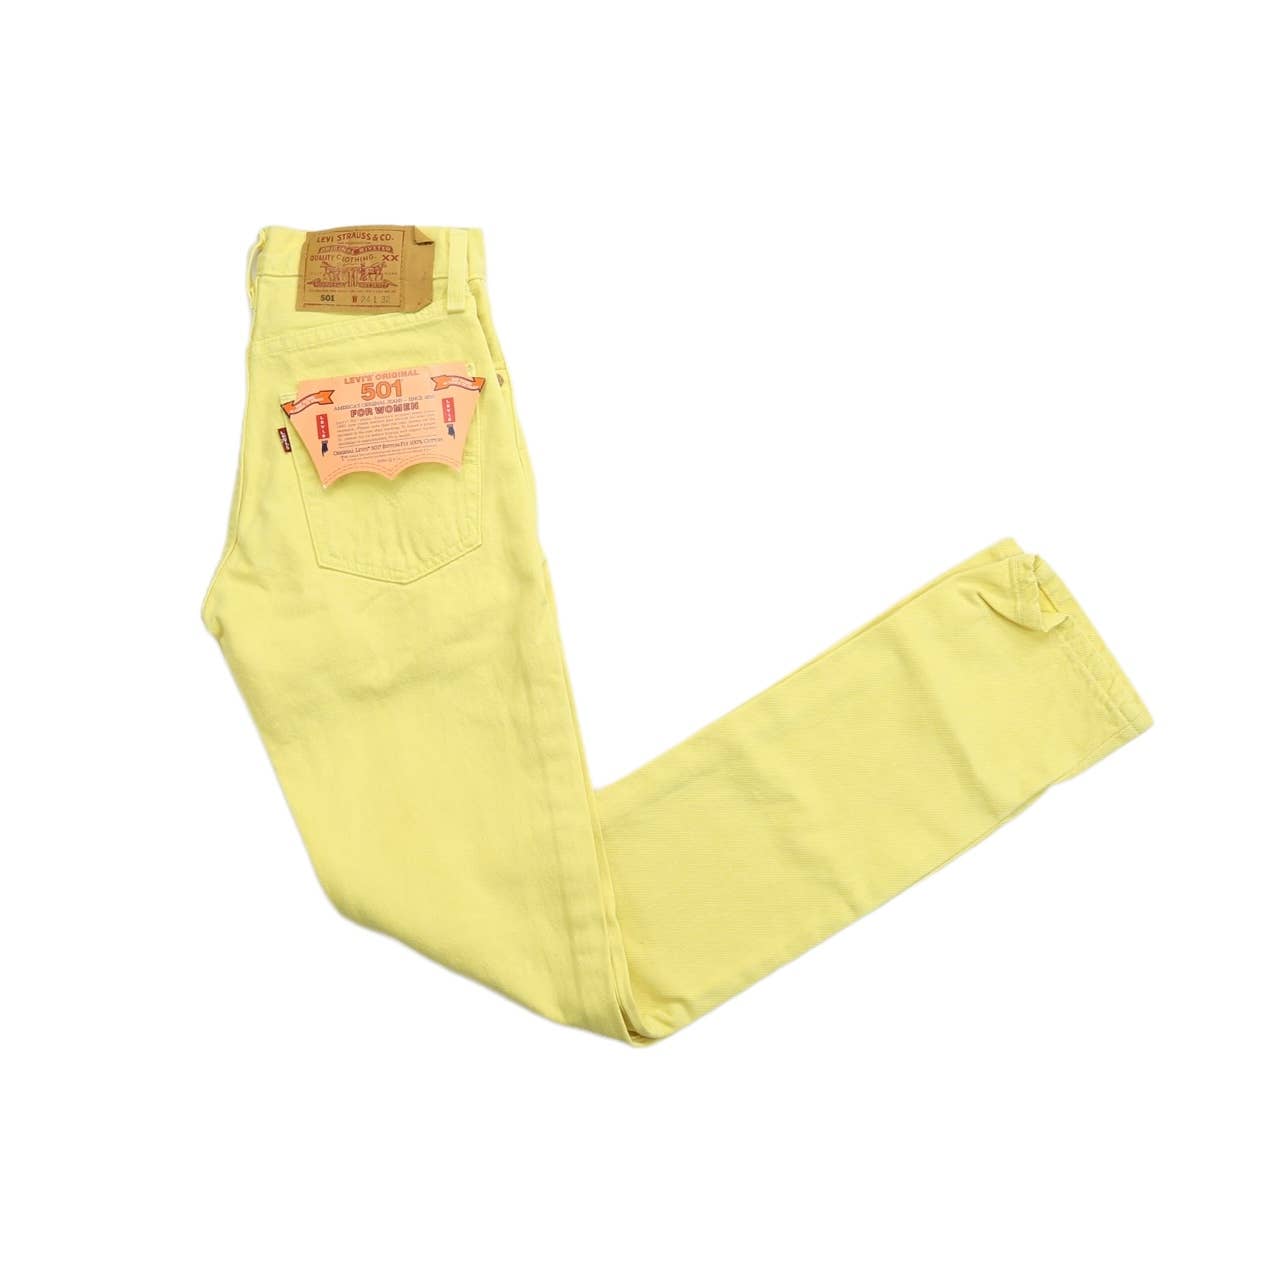 Vintage Levi’s 501 Deadstock Yellow Button Fly Jeans